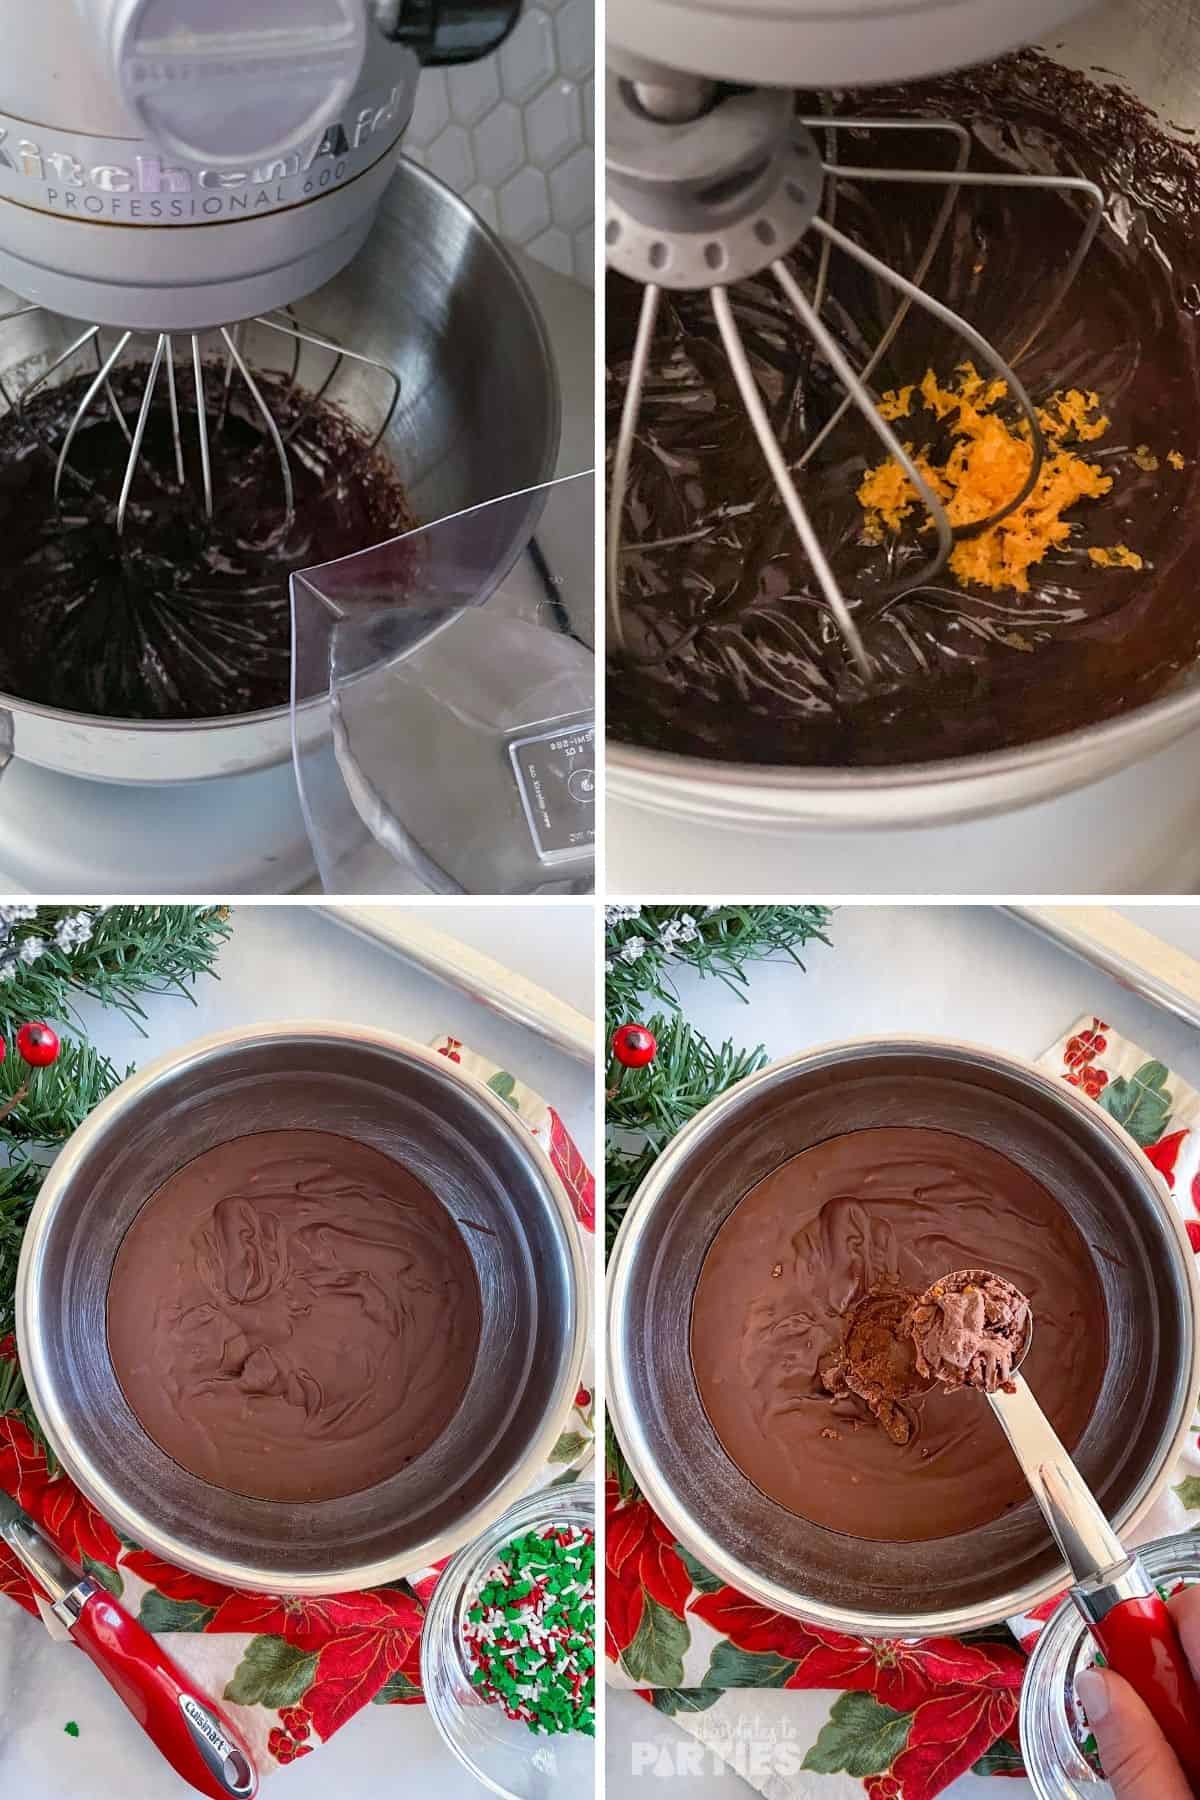 Adding citrus and liquor to ganache, and then scooping and rolling it to make truffles.